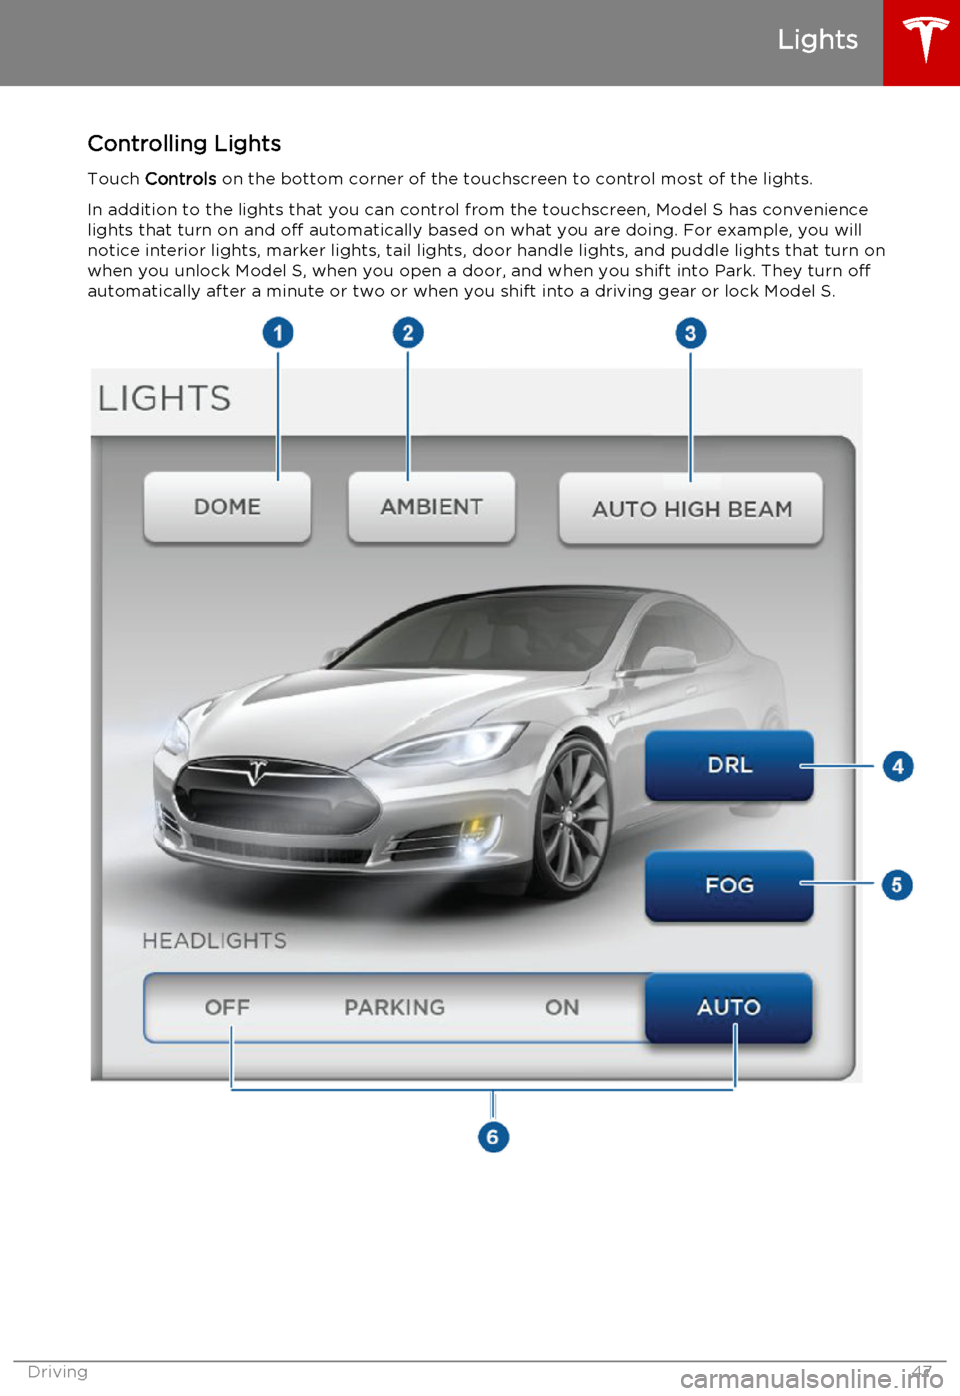 TESLA MODEL S 2015 Service Manual Controlling LightsTouch Controls  on the bottom corner of the touchscreen to control most of the lights.
In addition to the lights that you can control from the touchscreen, Model S has convenience li